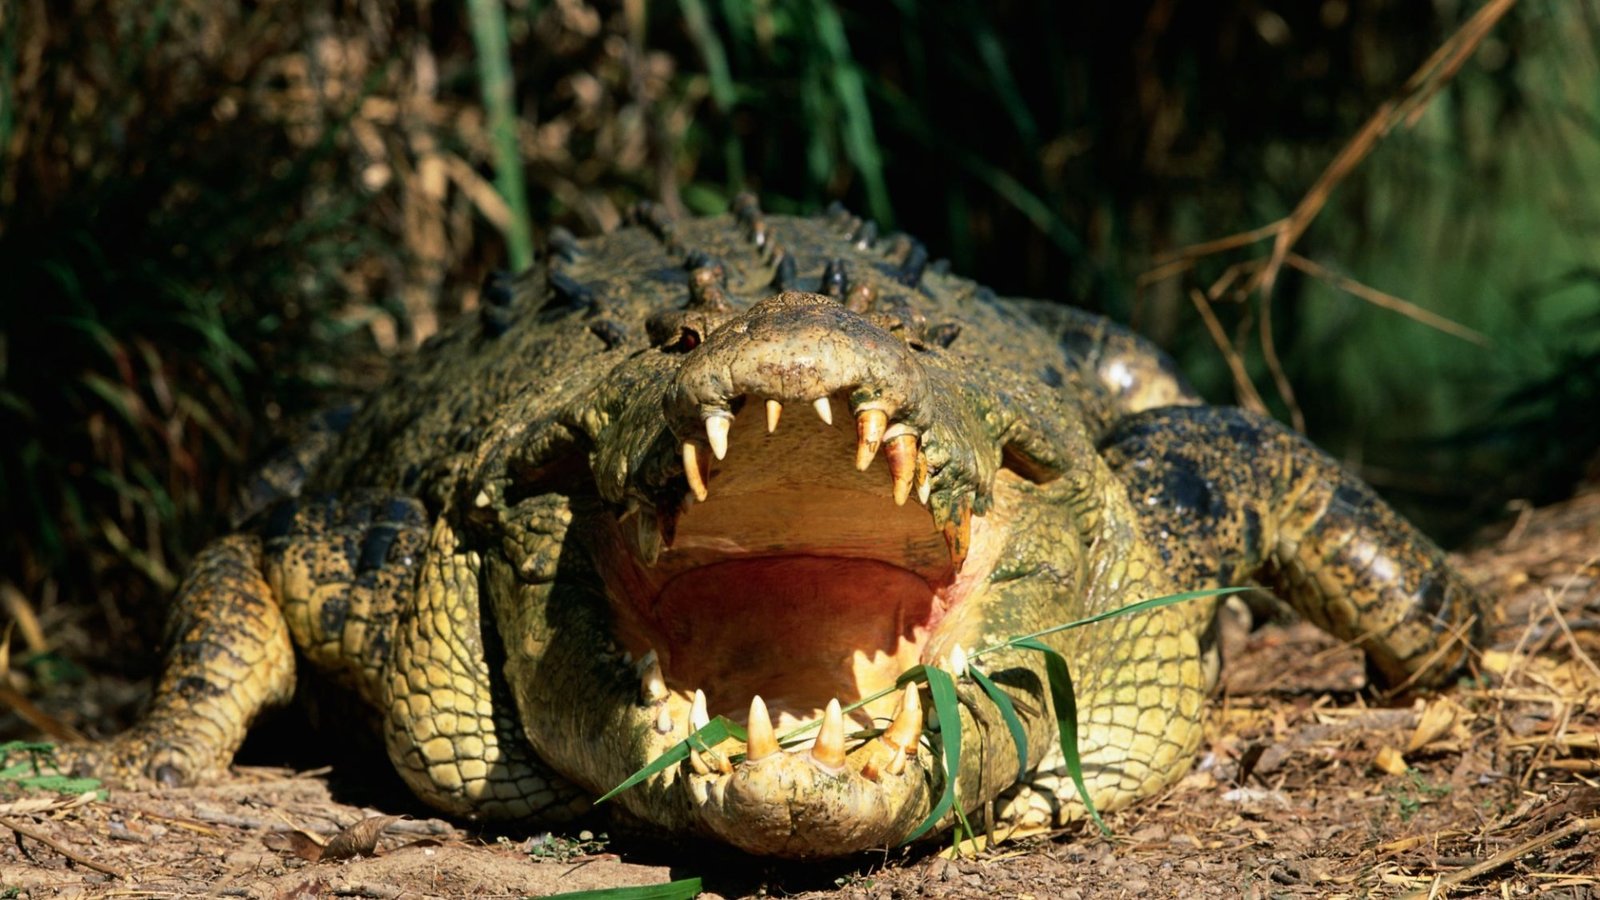 World’s deadliest animal attack saw crocodiles eat 500 soldiers alive with their comrades hearing chilling screams